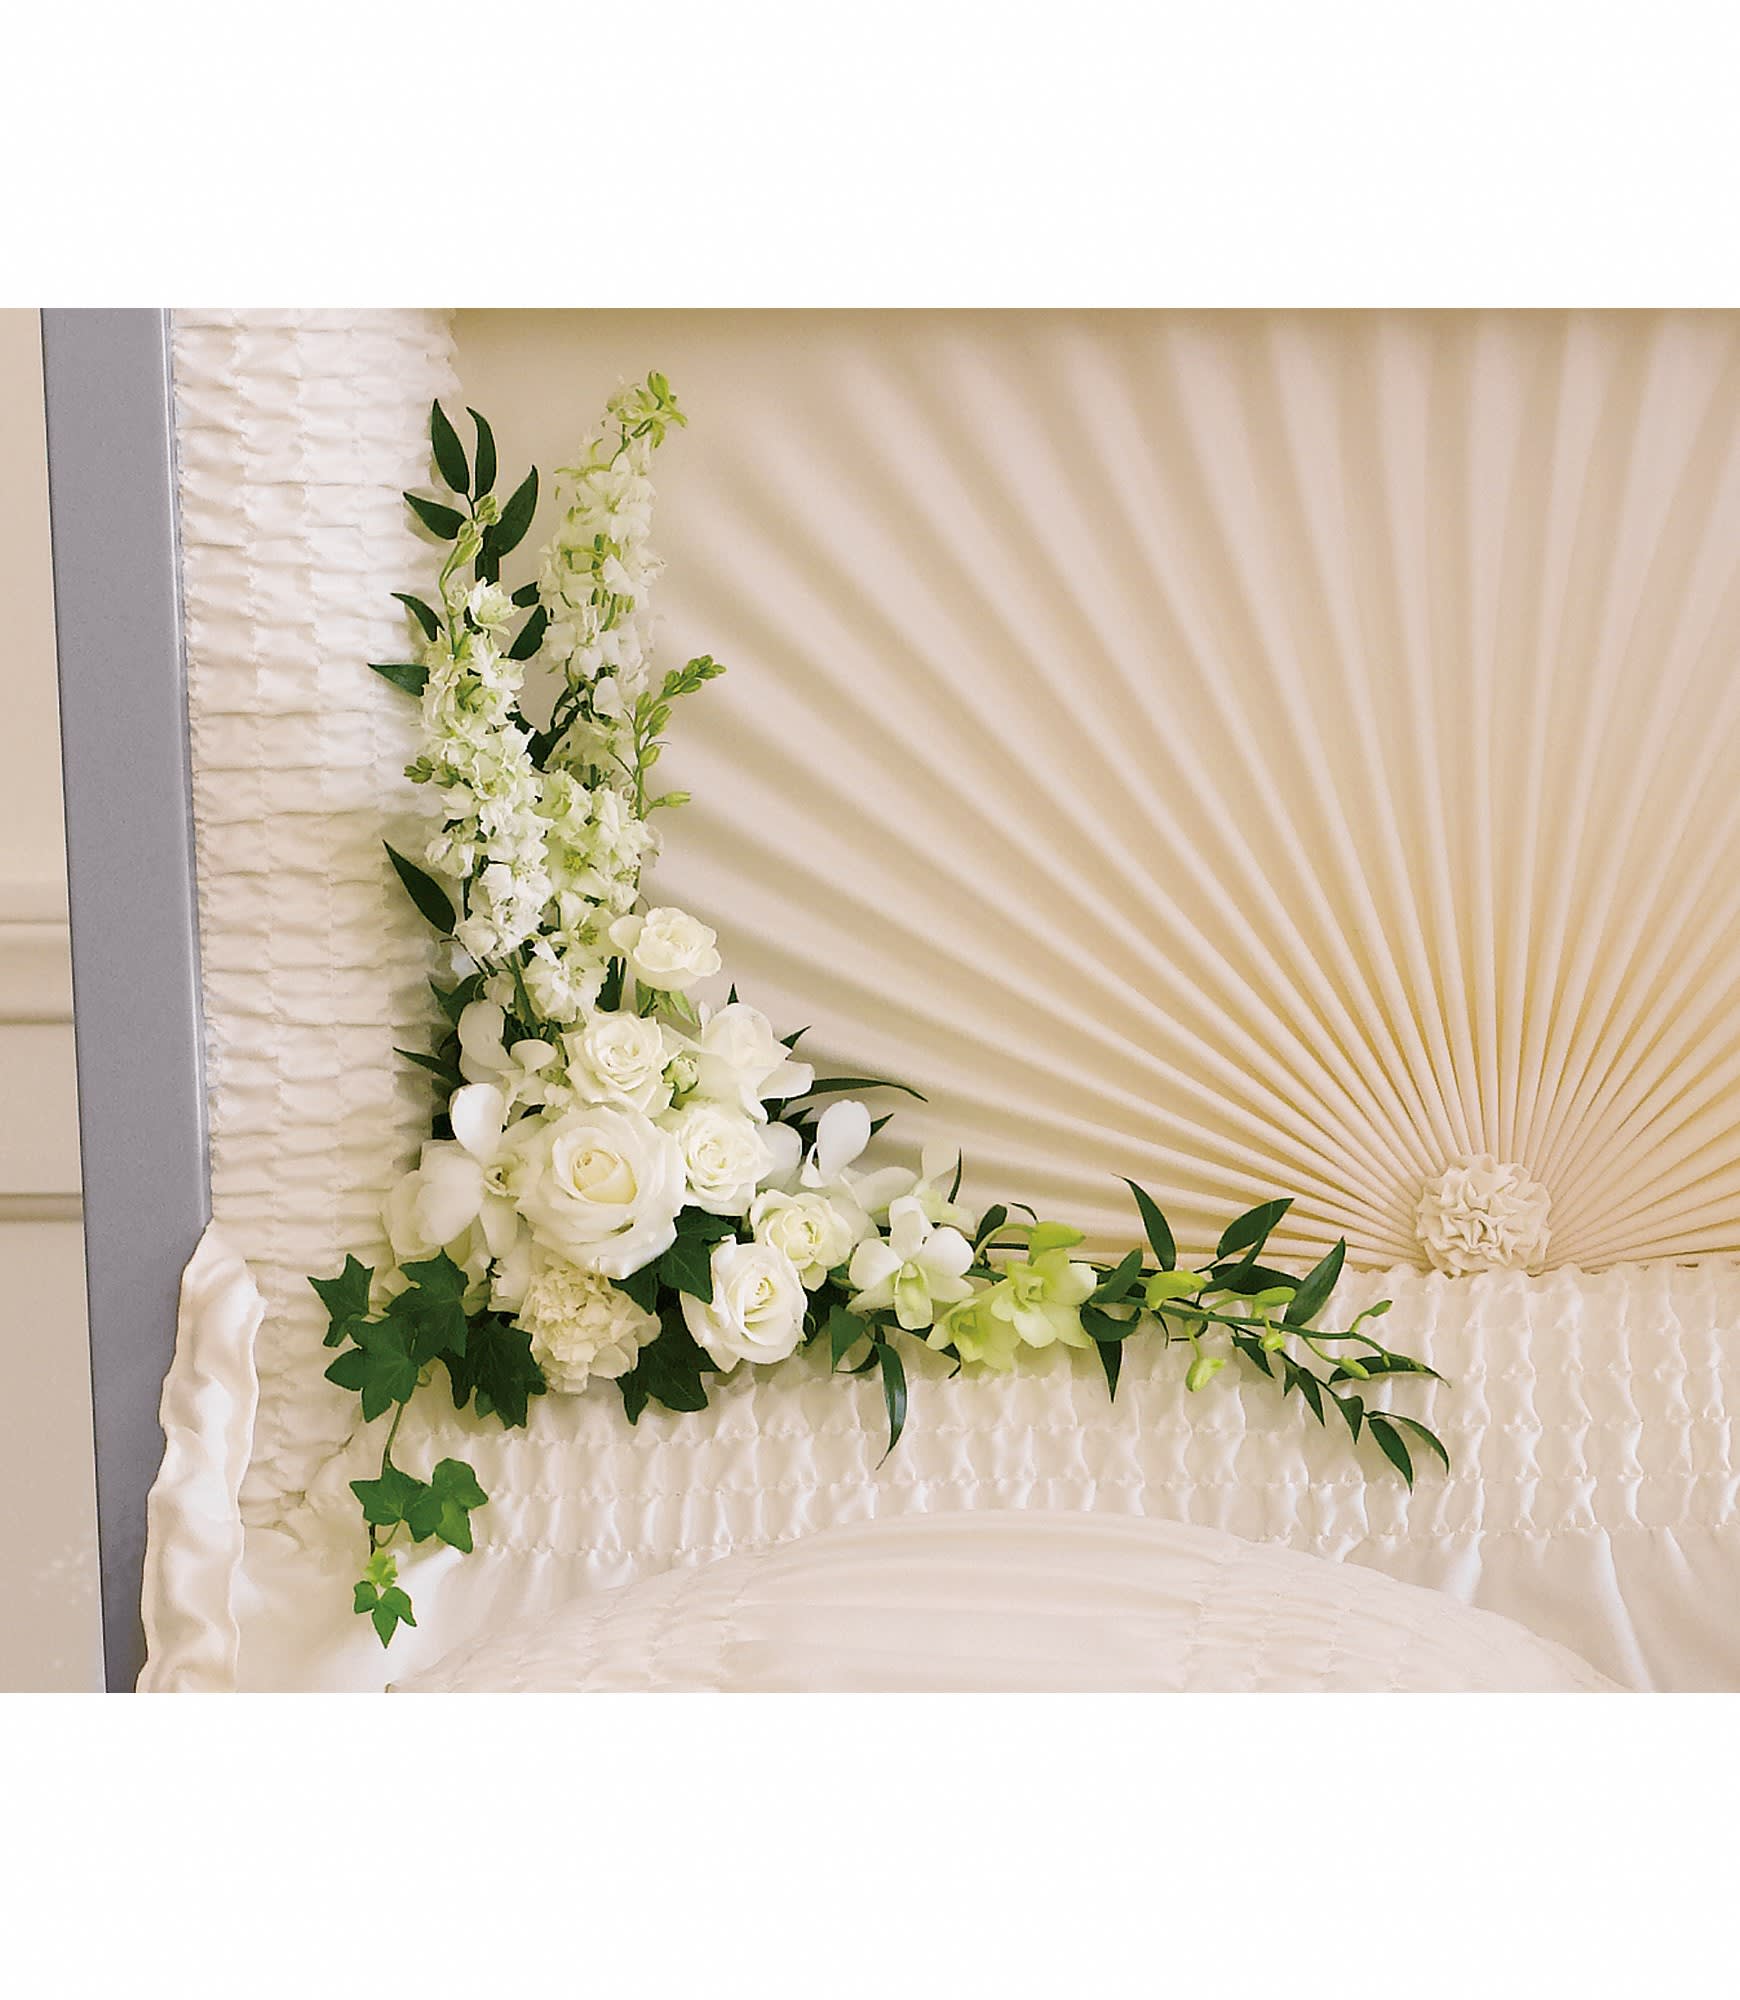 Moonlit Walk  - This serenely beautiful arrangement of white orchids, white roses and other popular white flowers is a fitting and very personal tribute when placed inside the casket. 